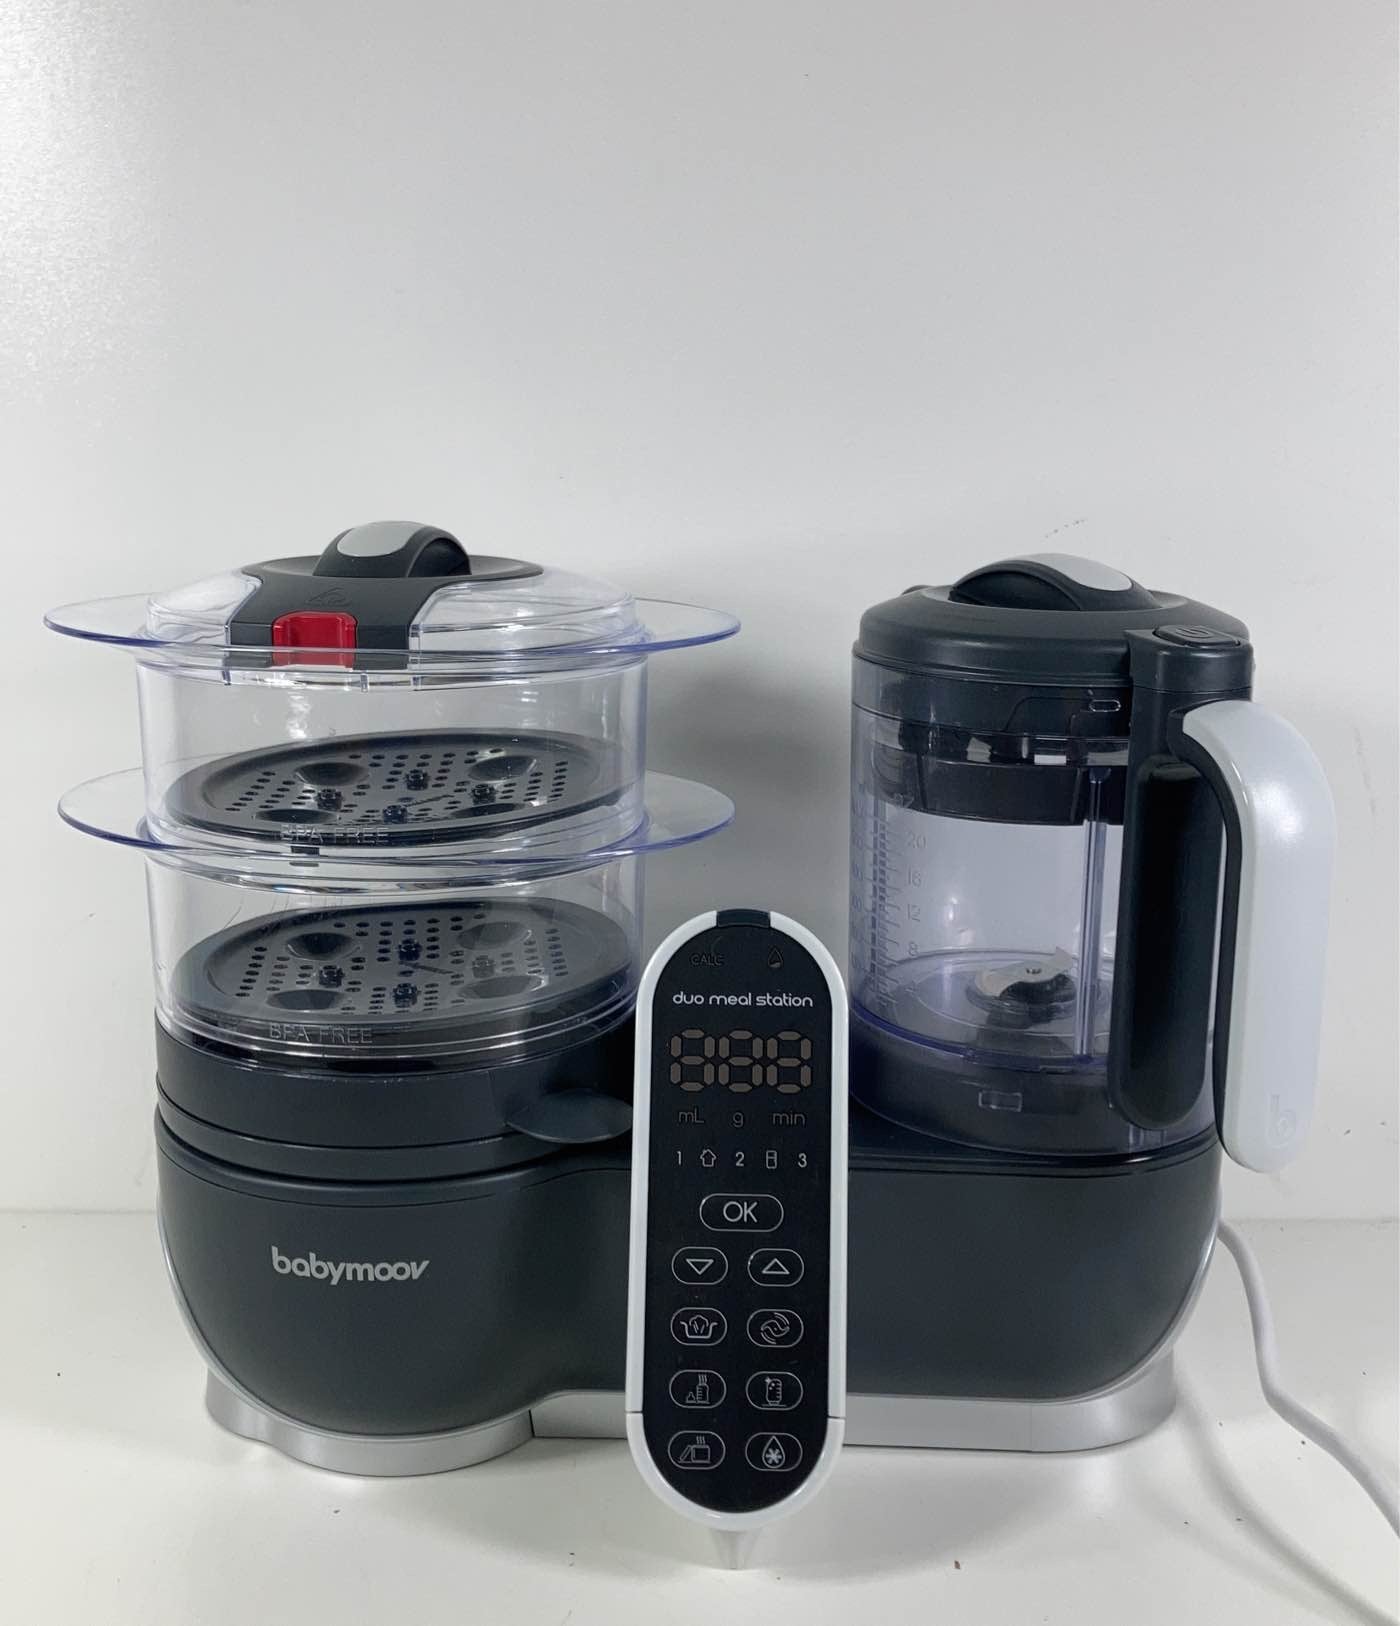 Duo Meal Station Food Processor